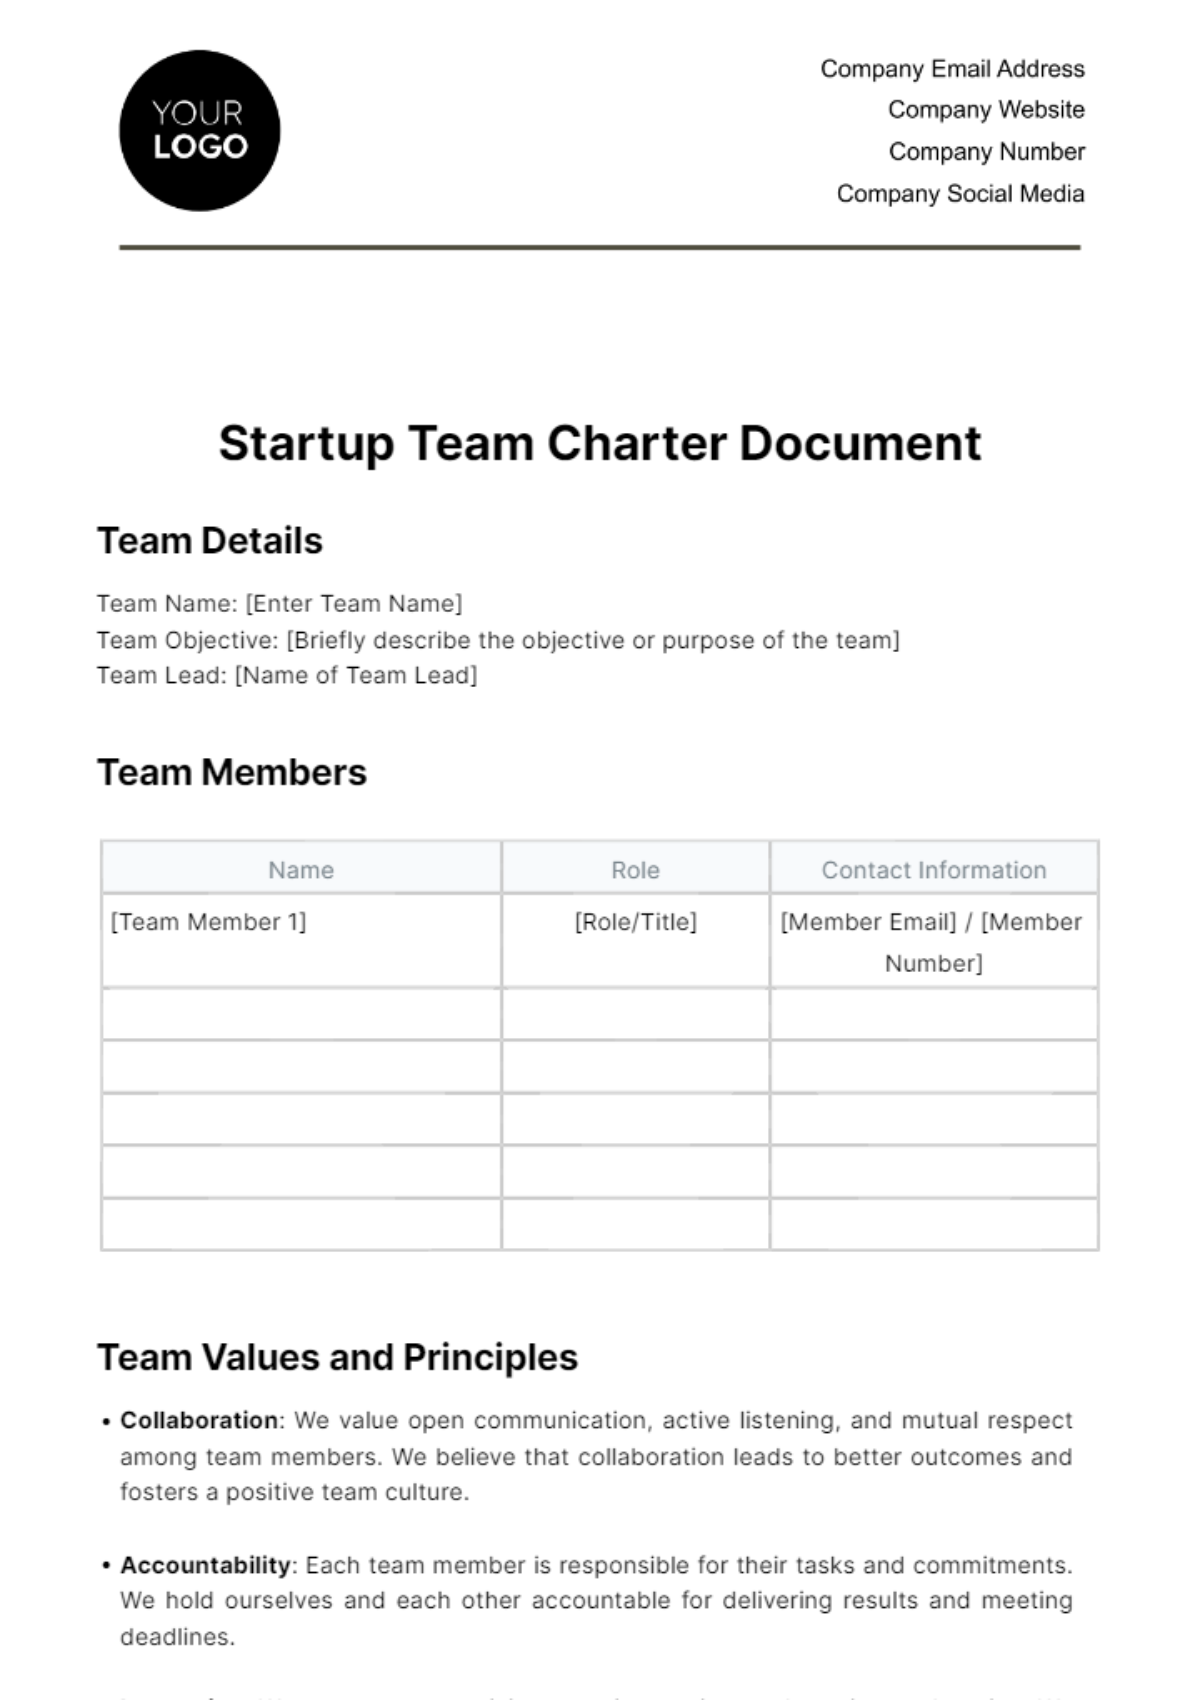 Free Startup Team Charter Document Template